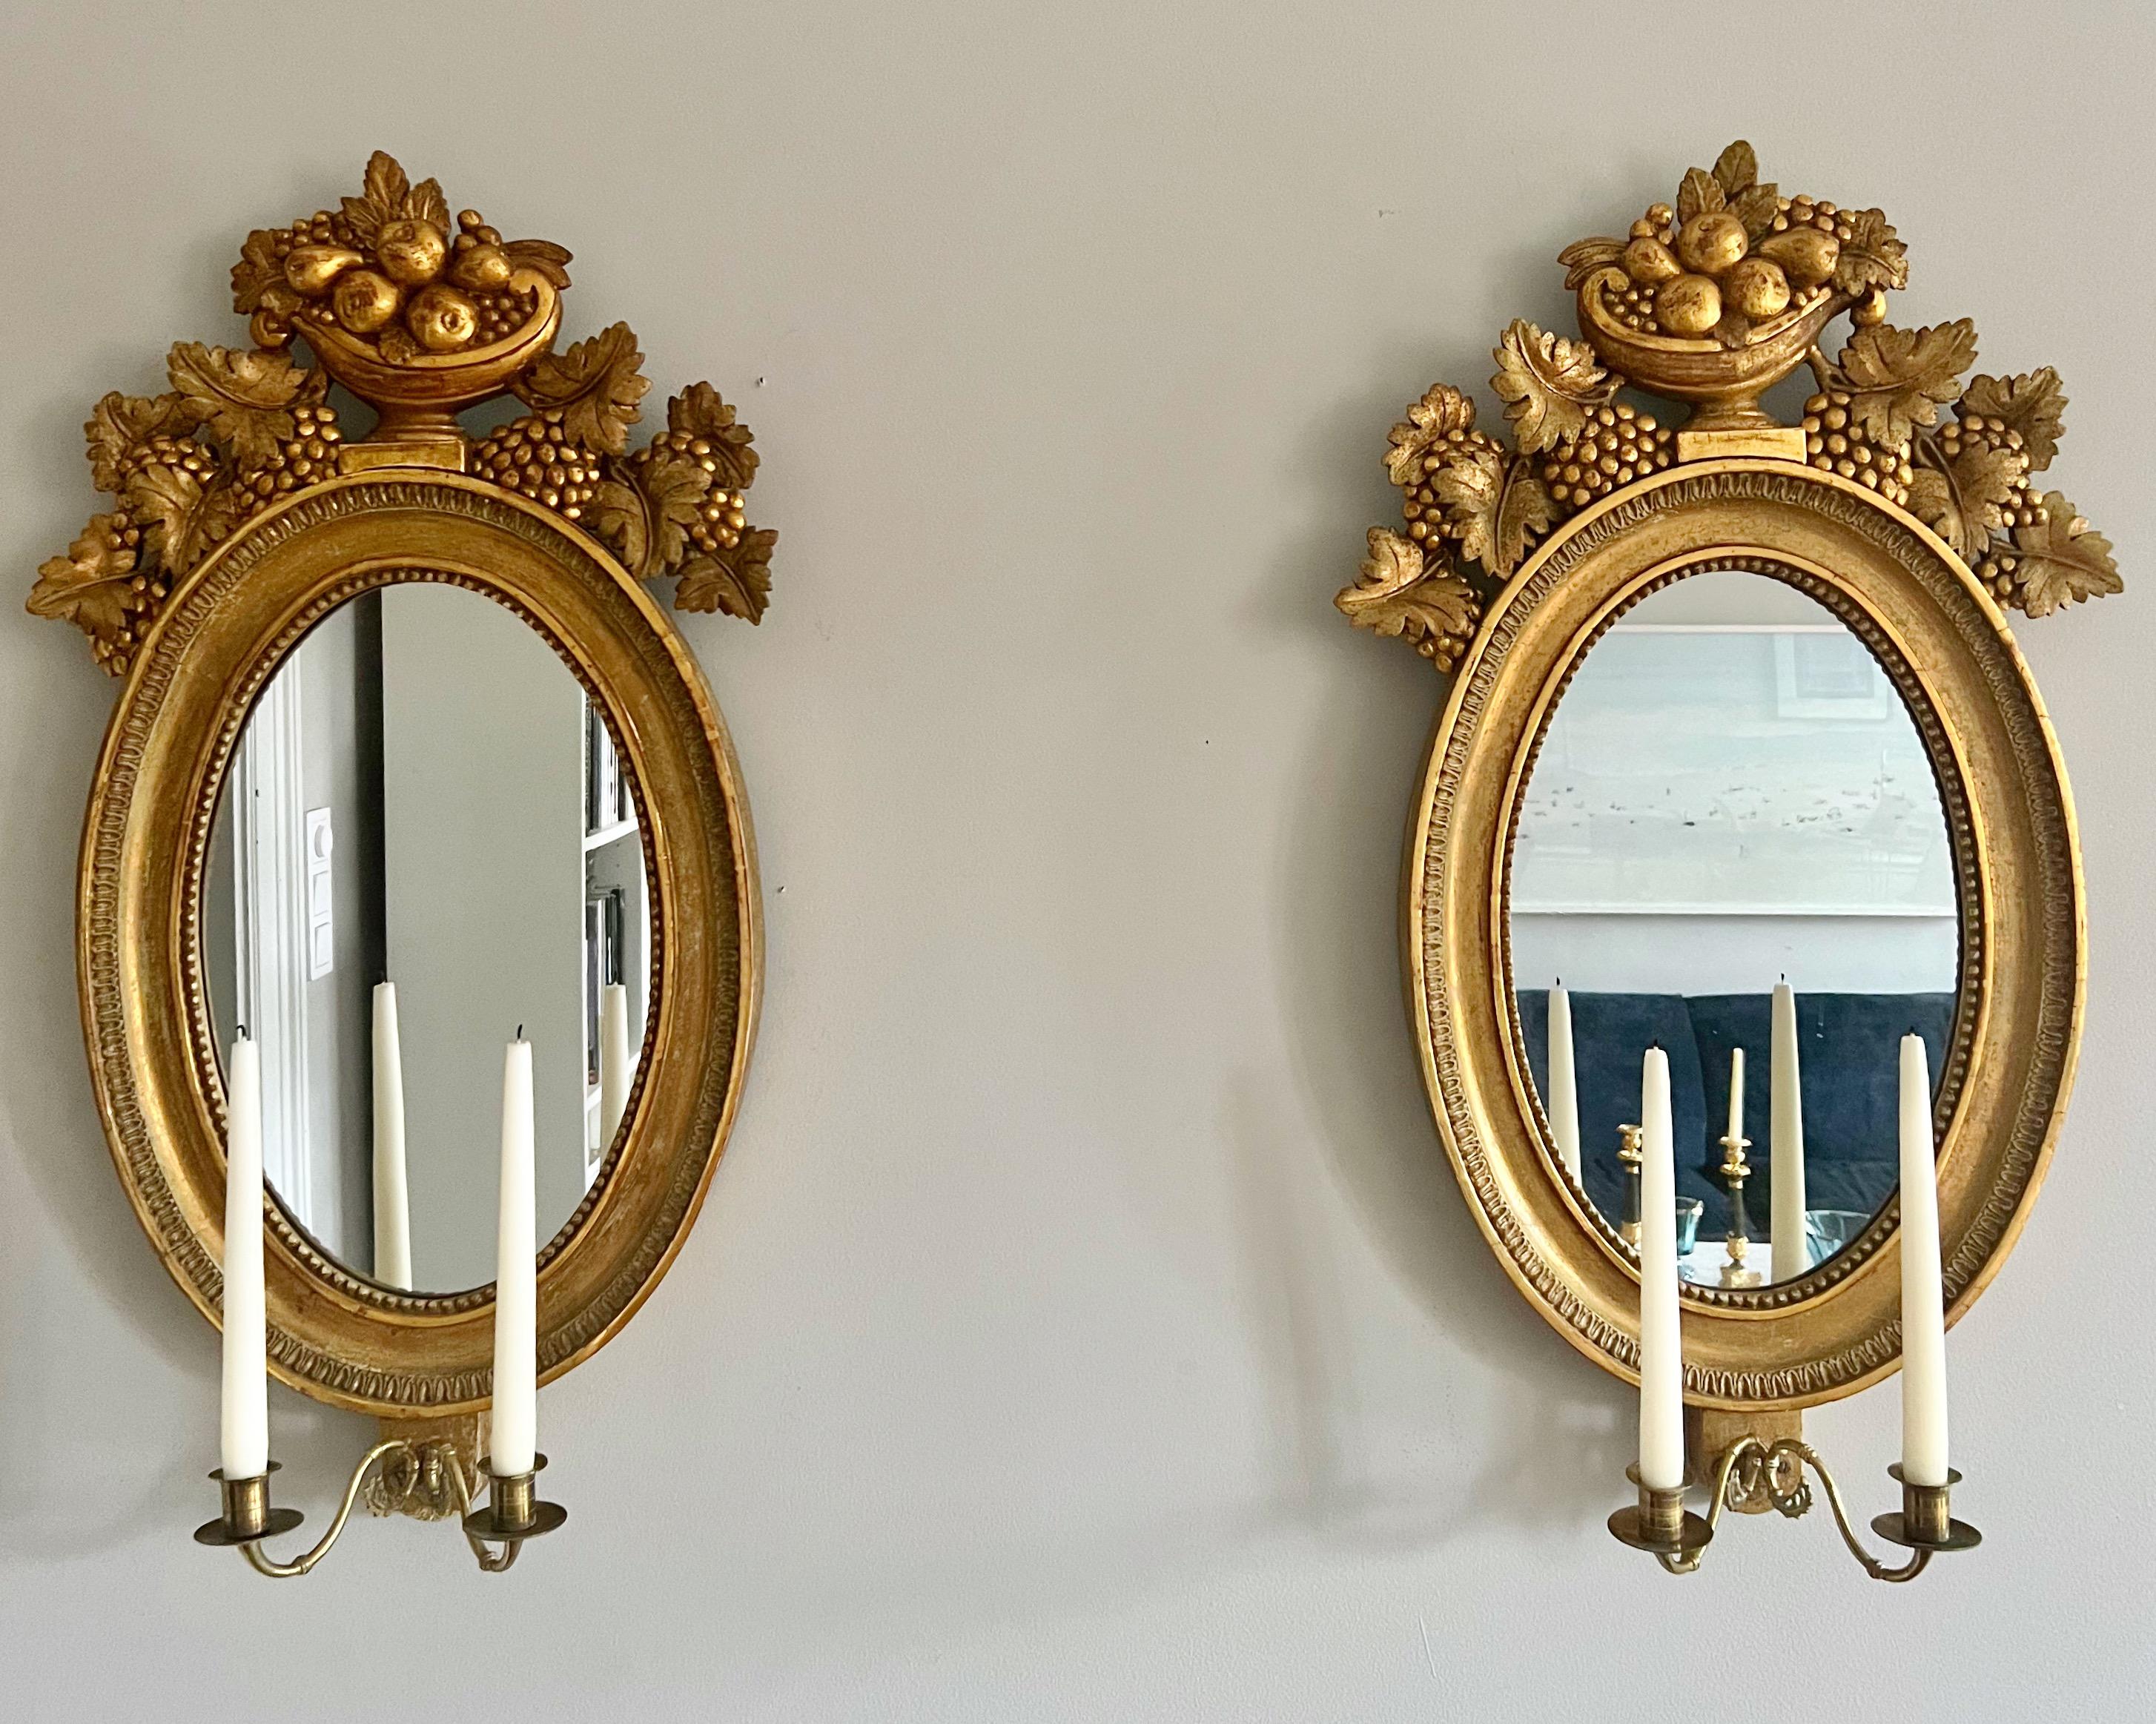 Empire Pair of 19th Century Swedish Mirrored Wall Sconces In Carved Gilt Wood